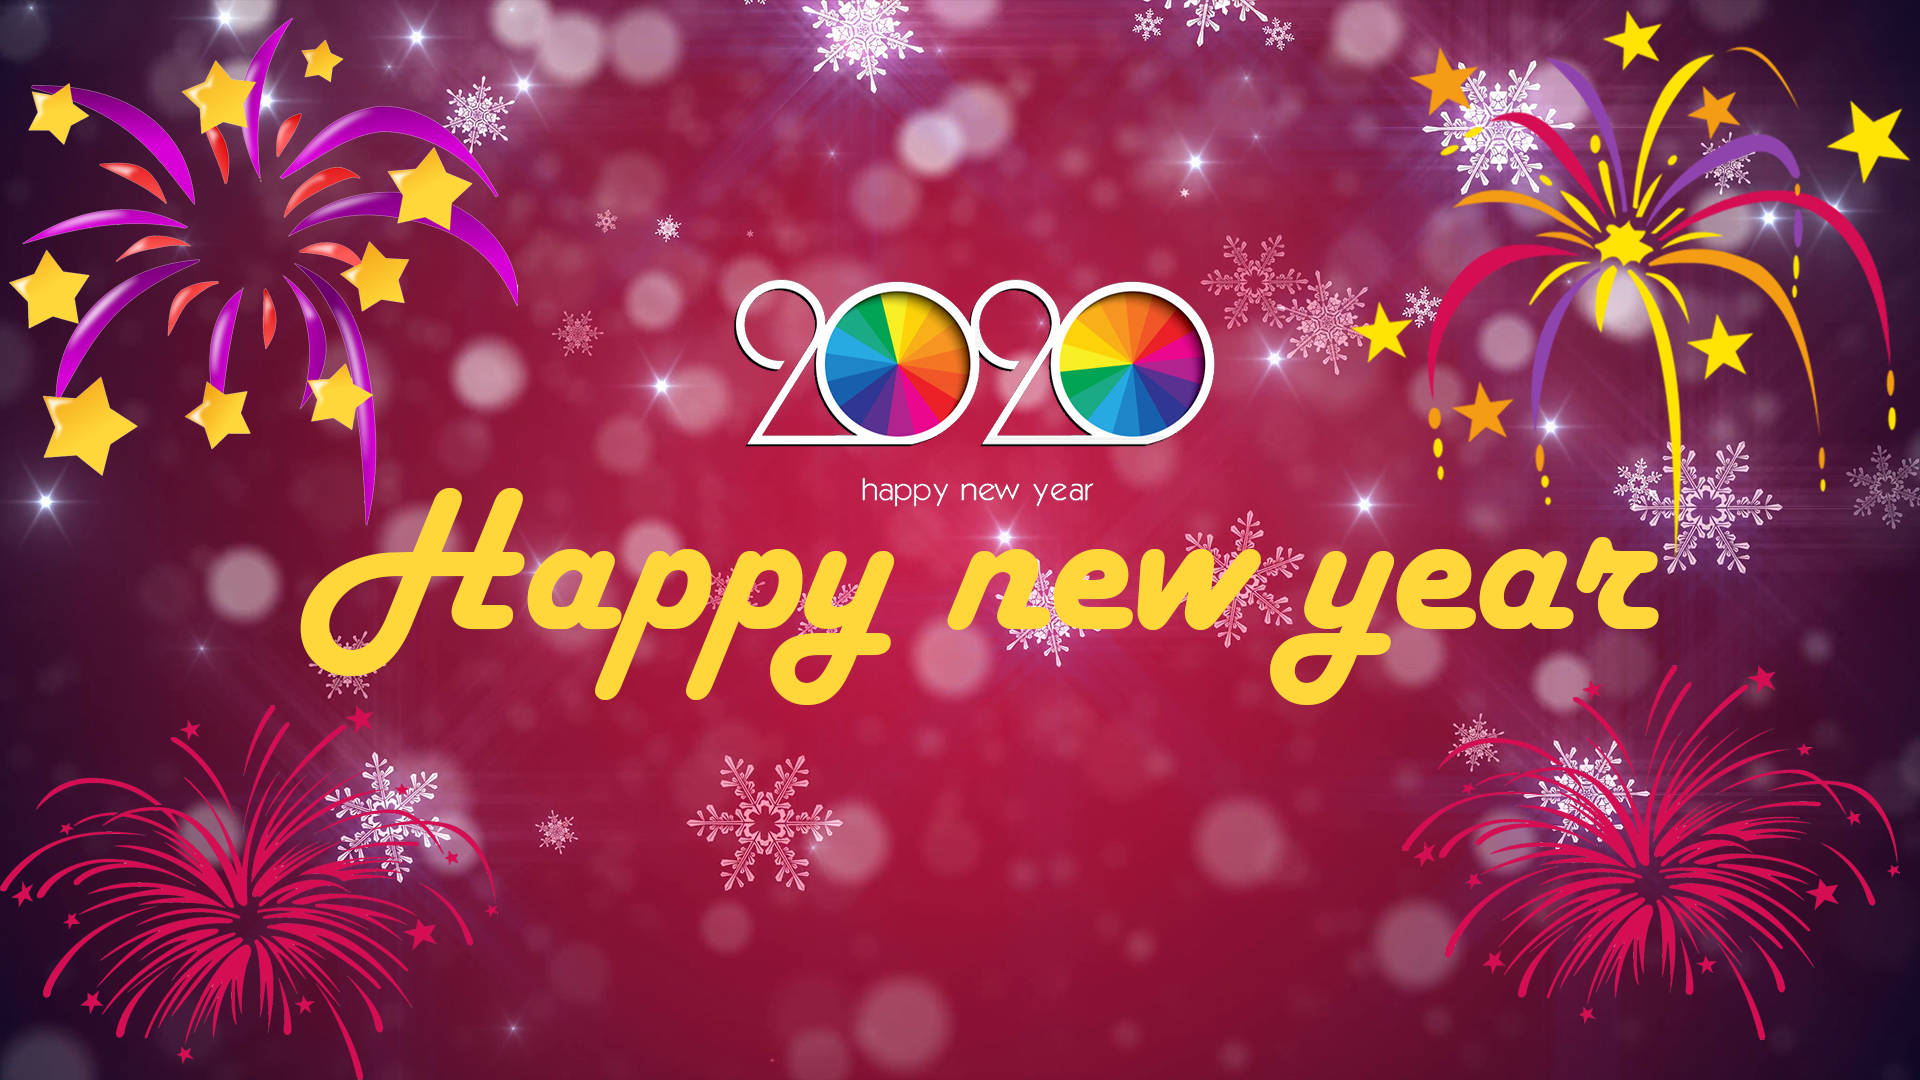 New Year 2020 Hd Wallpaper. Background Image. Wallpaper